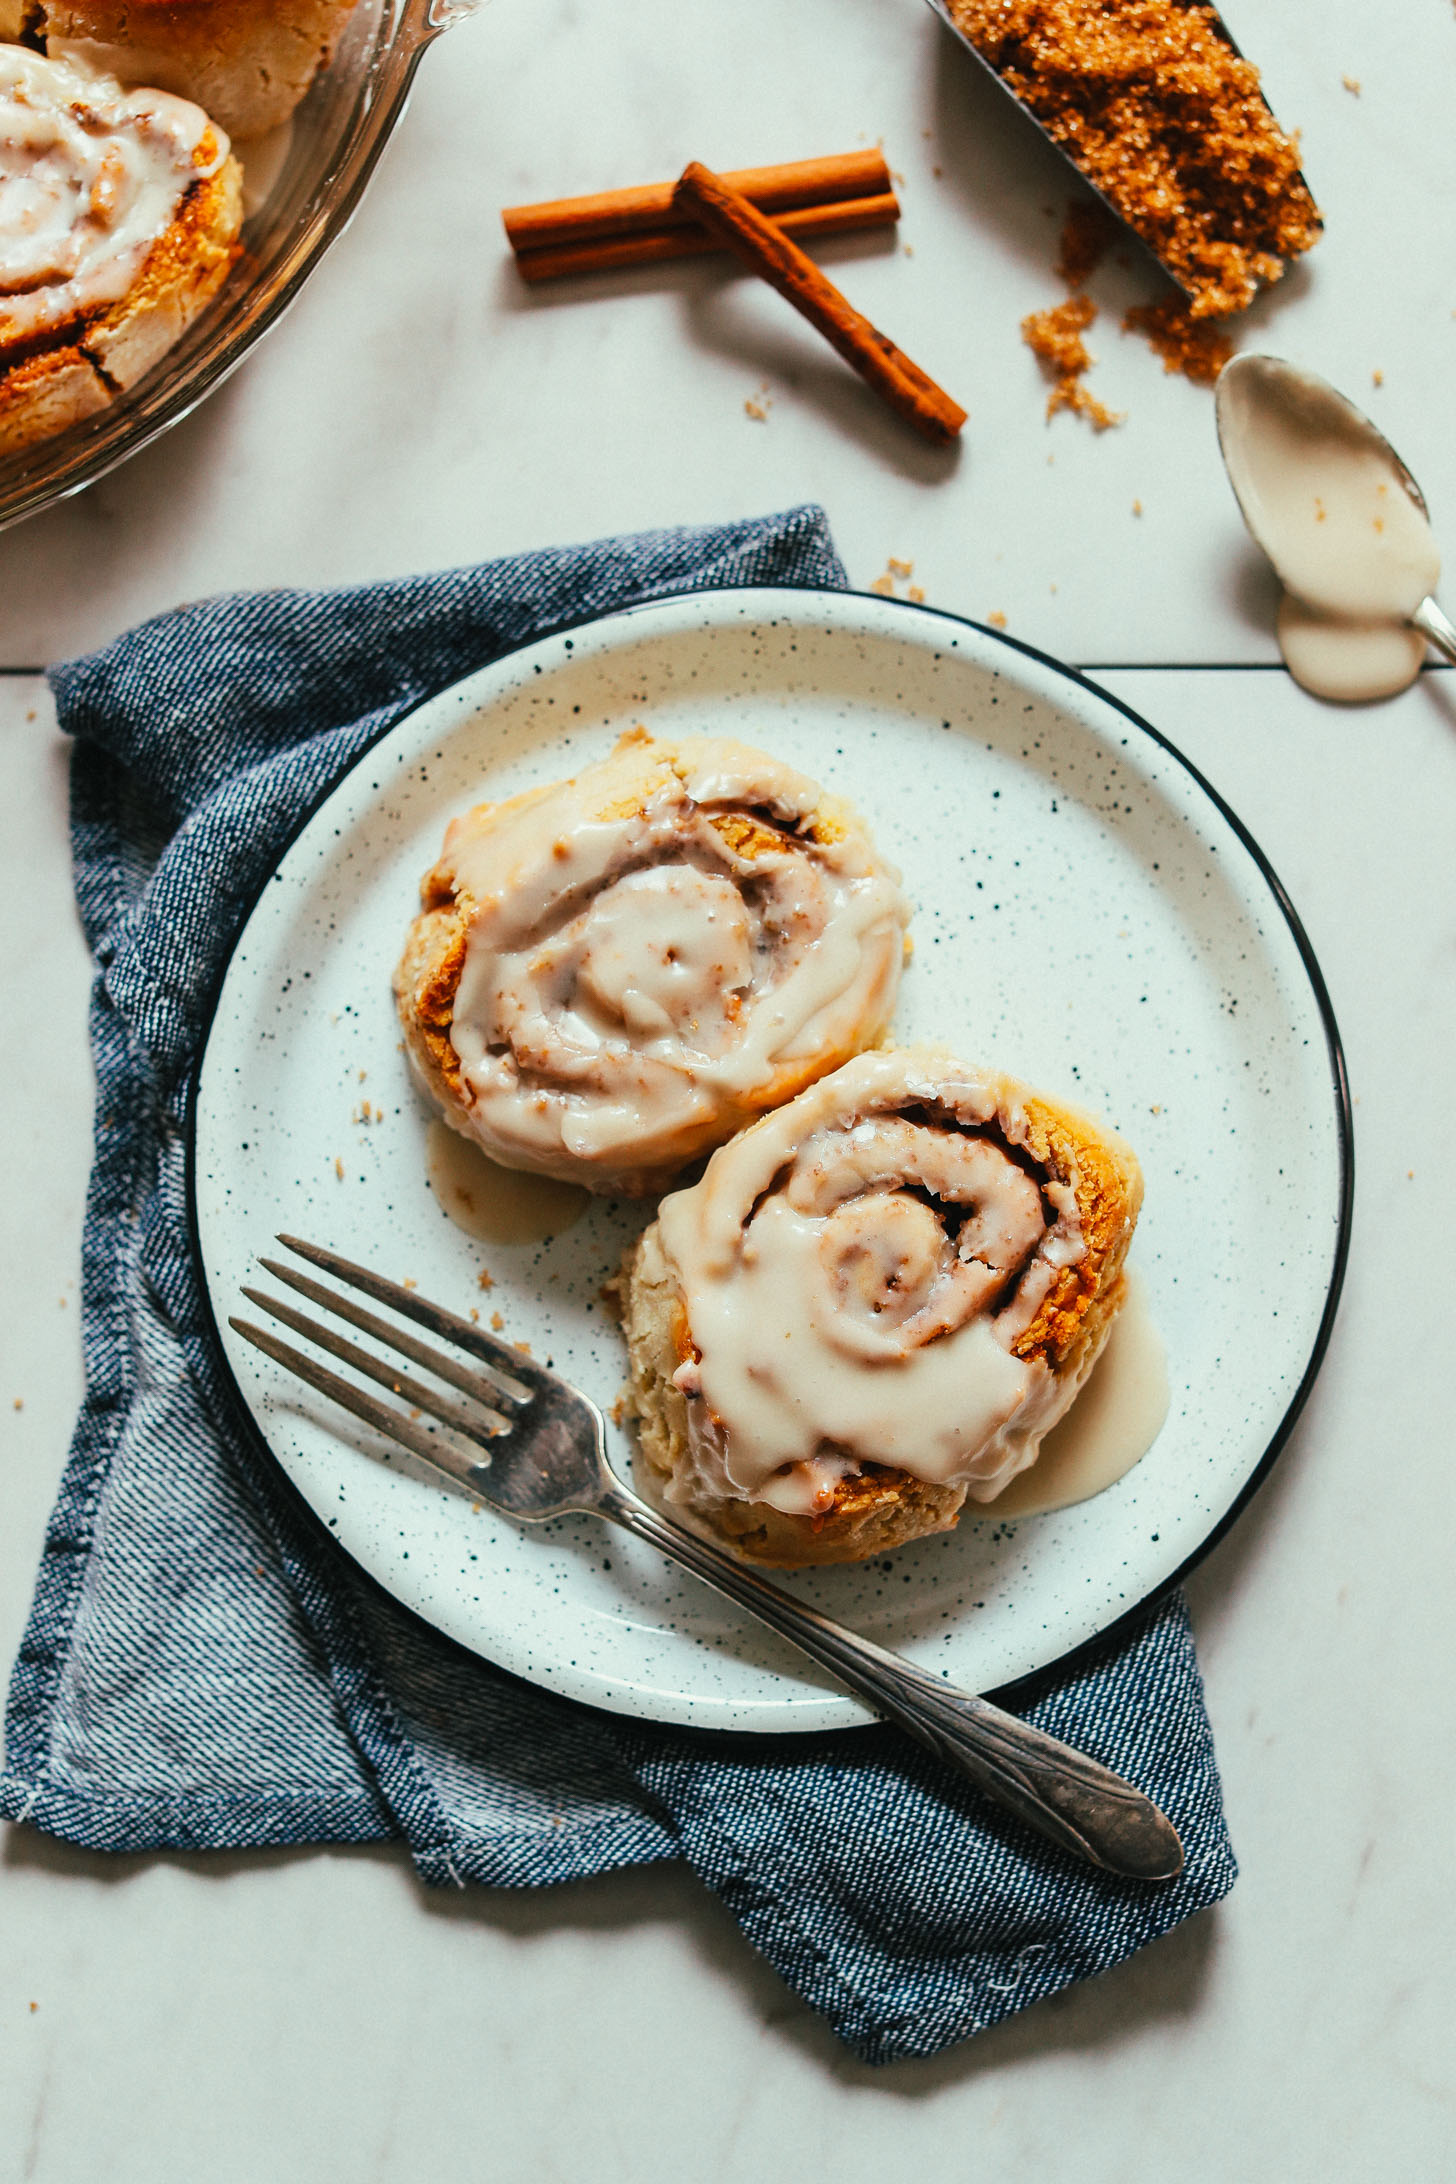 Plate of homemade Cinnamon Rolls topped with icing for a luxurious vegan dessert